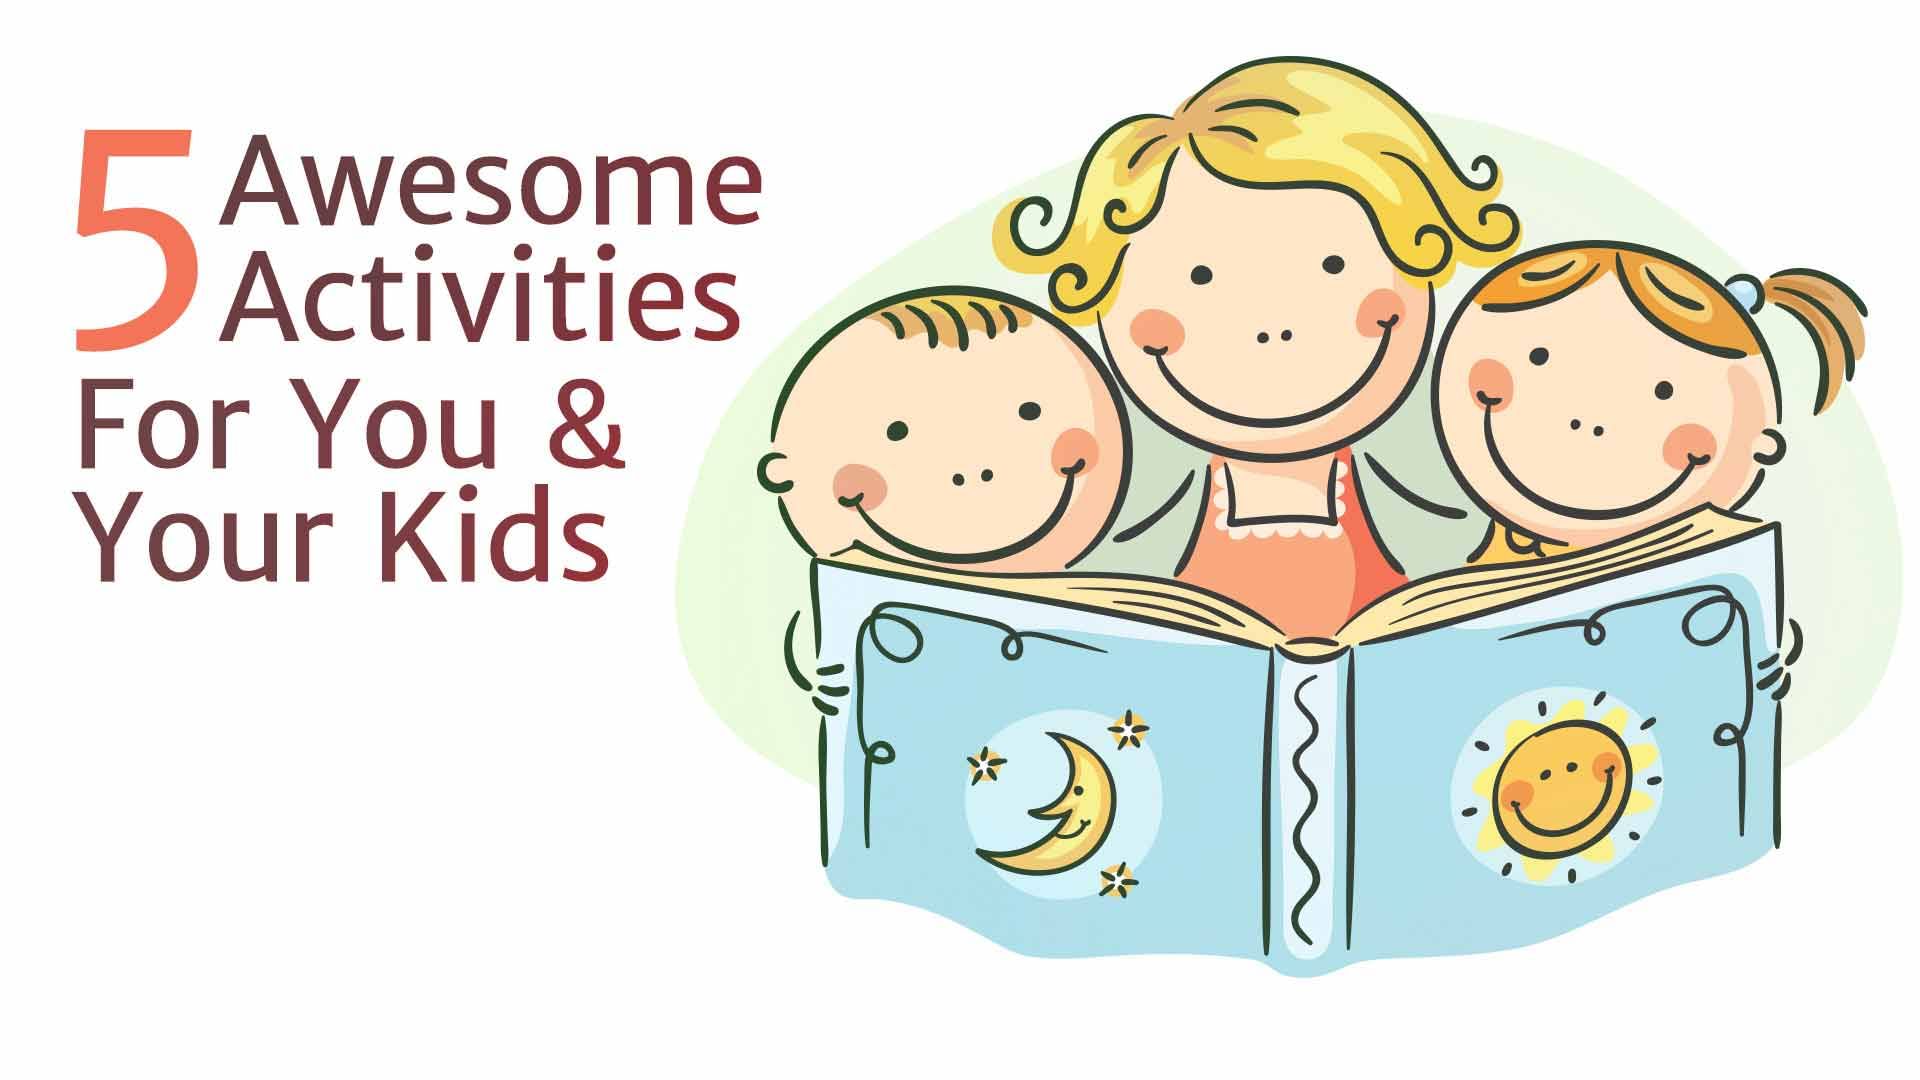 Children’s Day: 5 Awesome Activities For You & Your Kids